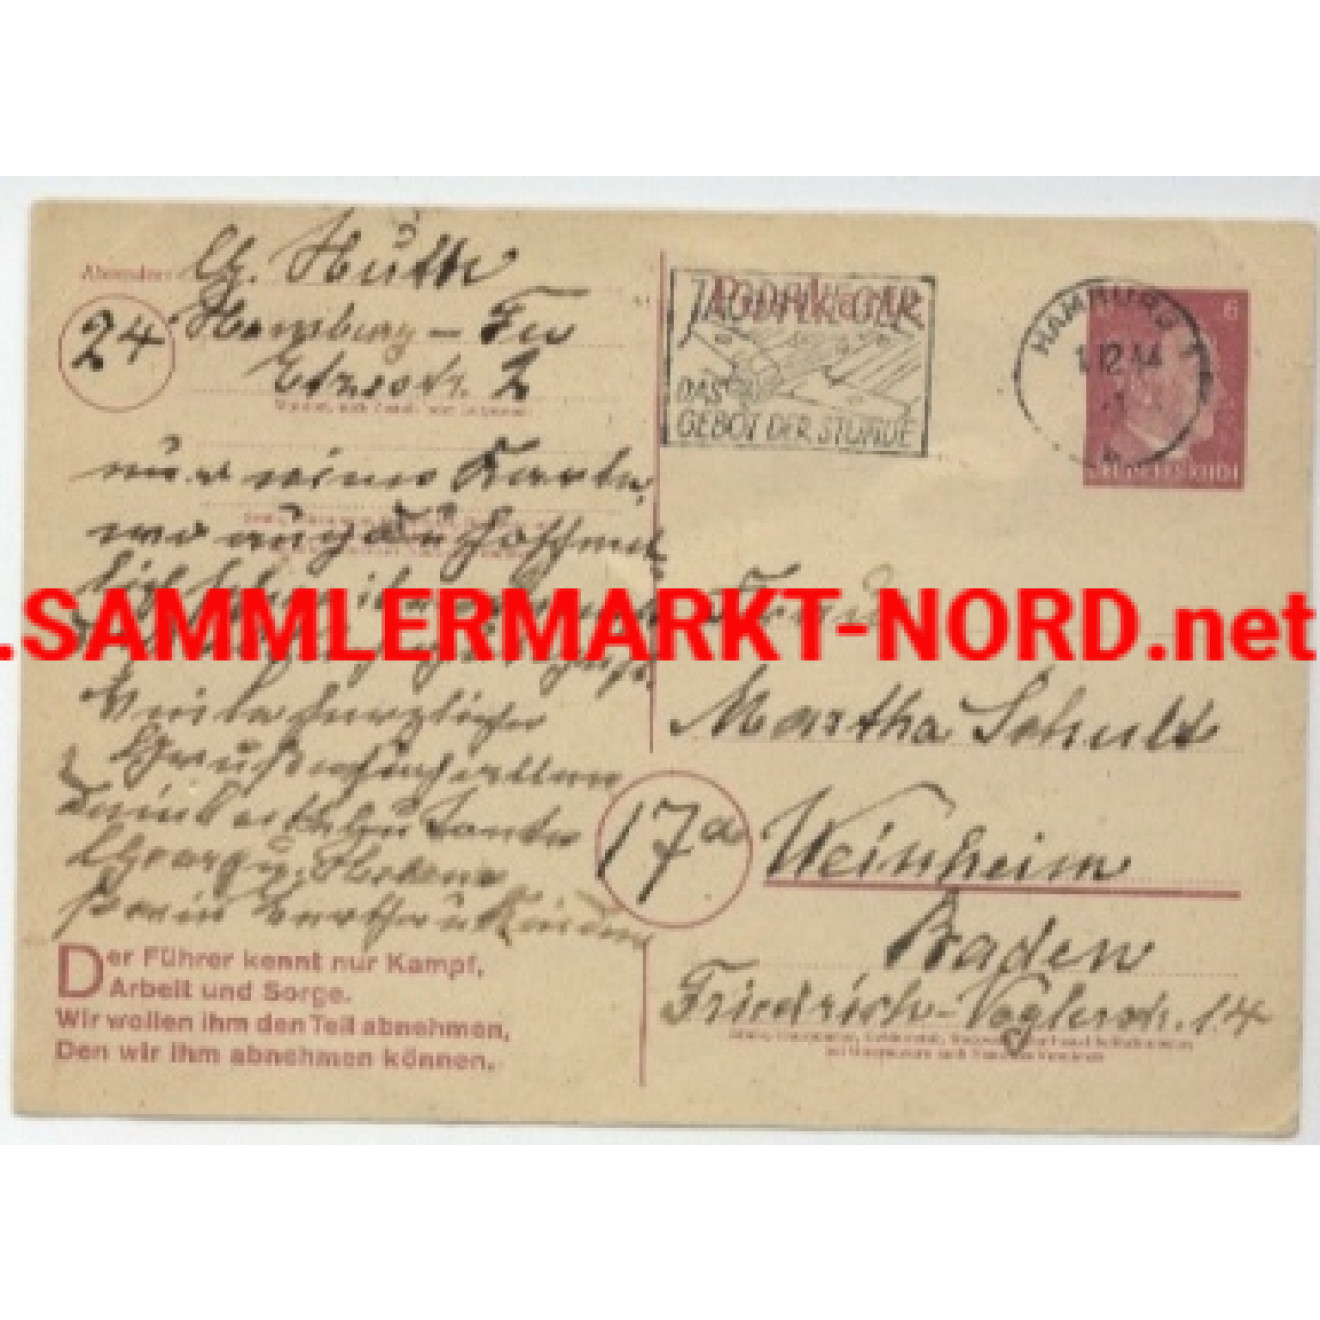 Postcard with advertising stamp "flighter pilot the requirement 